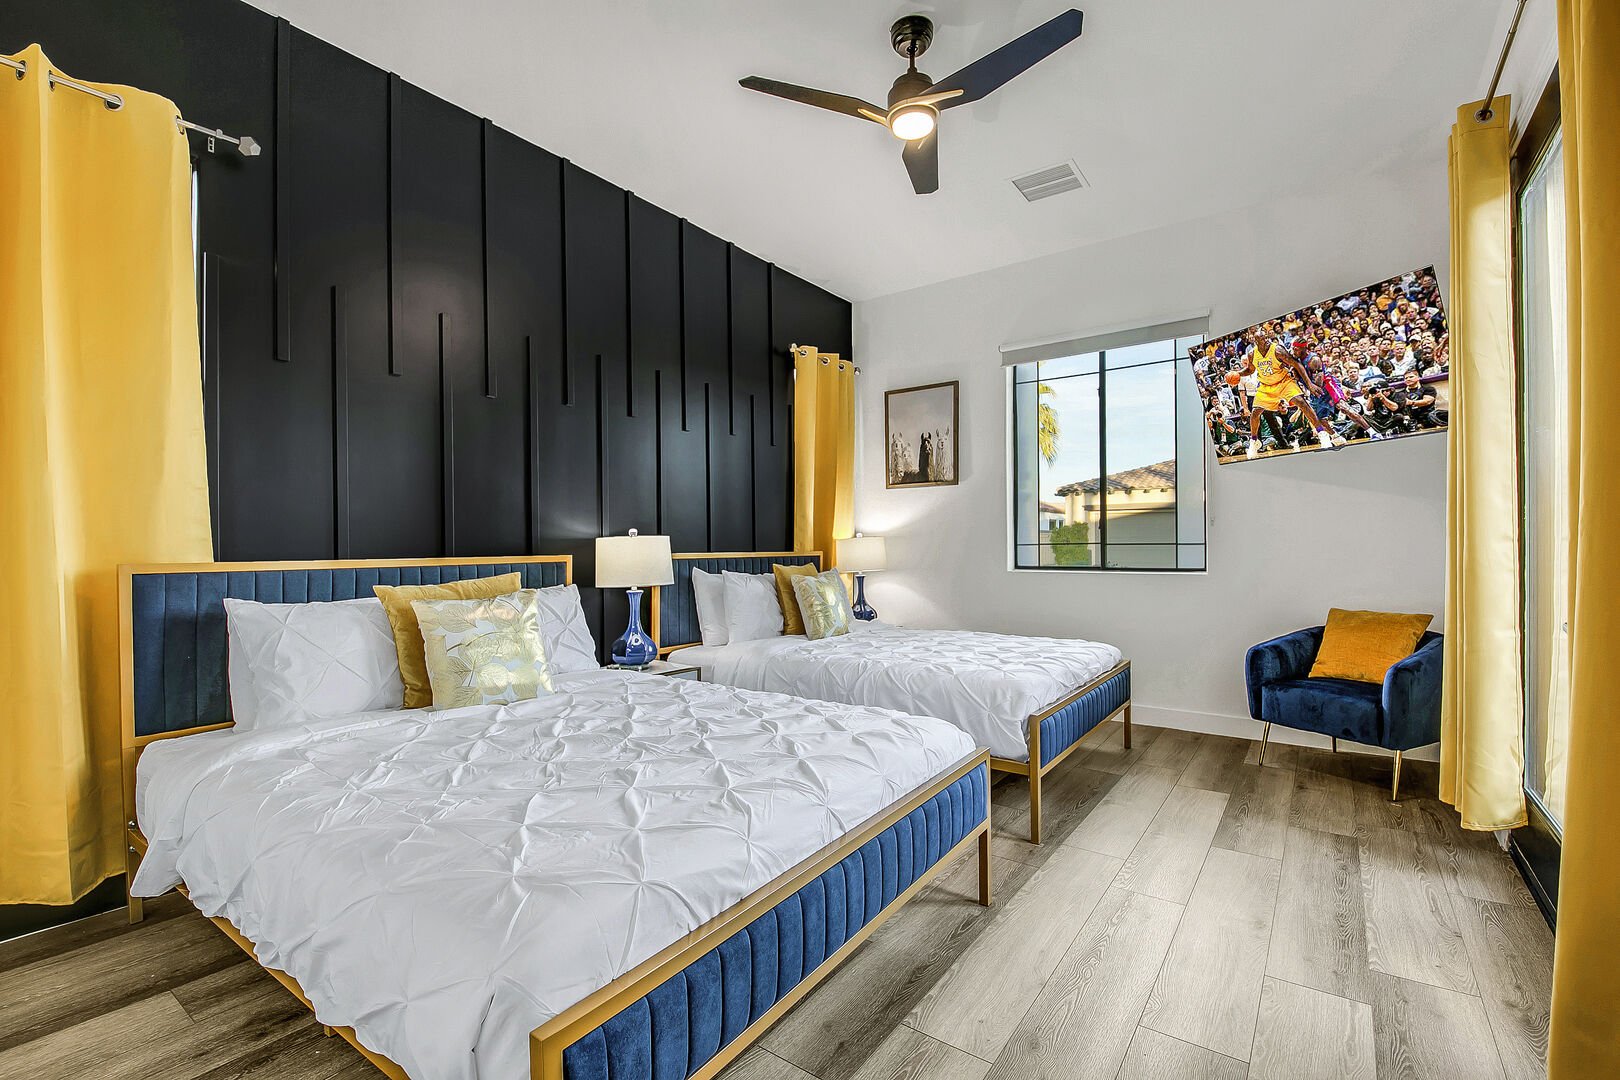 Suite 2 is located to the right of the entrance doors and features two Queen-sized Beds, 55-inch TCL with Roku Smart television, a remote-controlled ceiling fan, and a reach-in closet with access to the front courtyard.